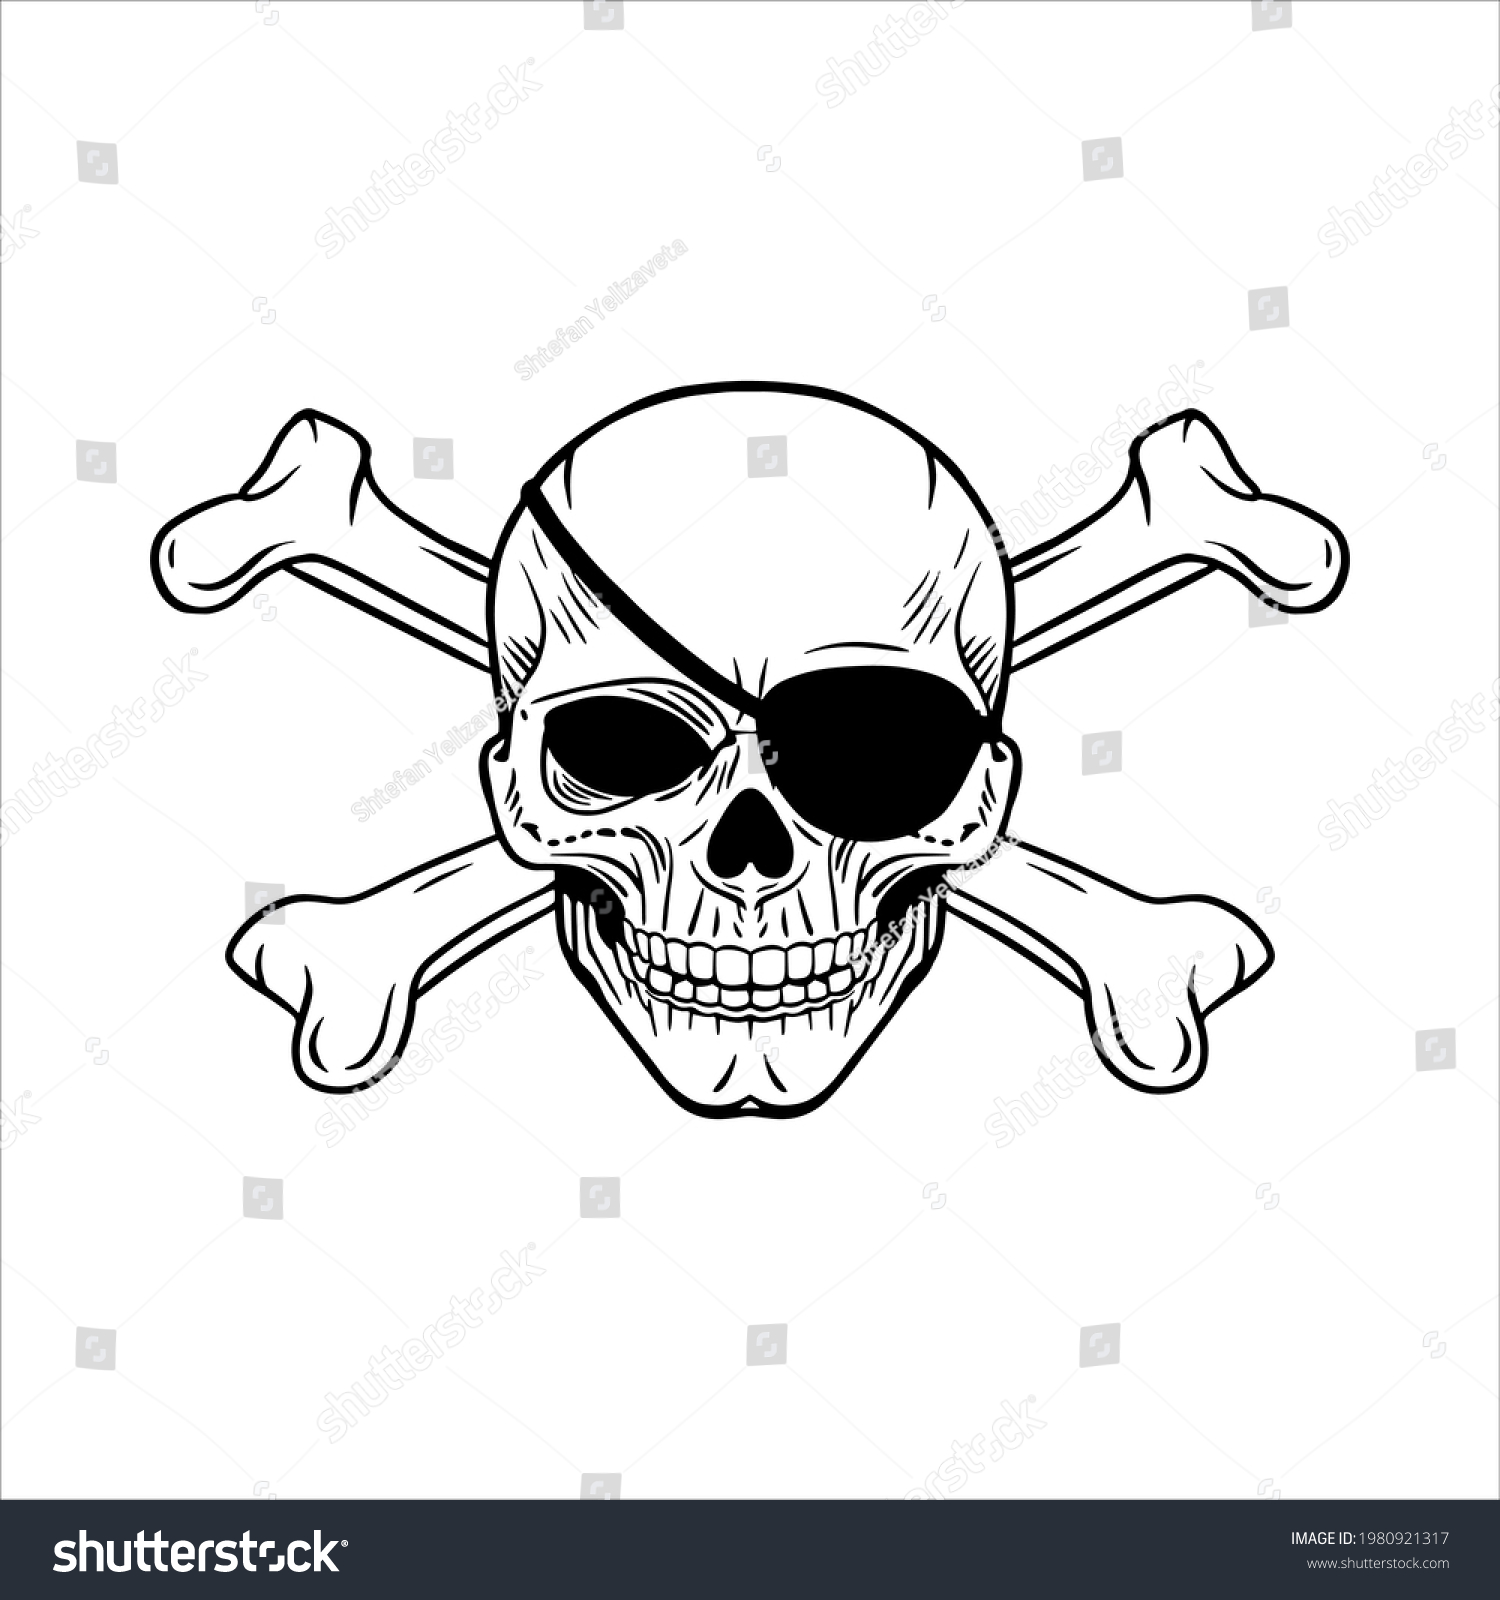 SVG of Skull. The skeleton of a stake. Dead pirate with bones. Clipart vector illustration. Vinyl cutting and printing svg